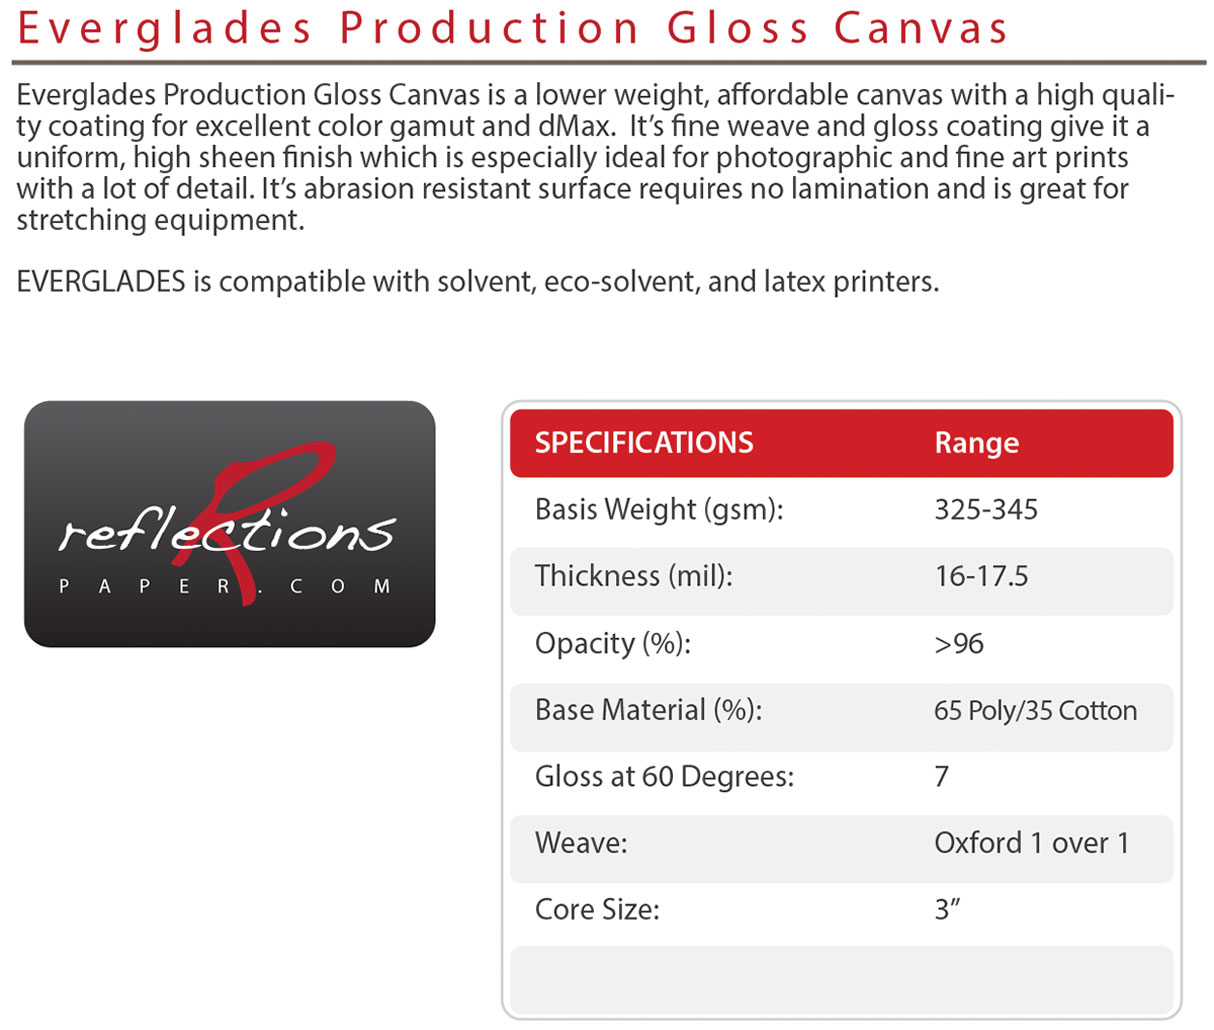 Reflections Everglades Production Gloss Canvas for Solvent Eco-Solvent and Latex Printers uniform gloss sheen with good stretching and durability